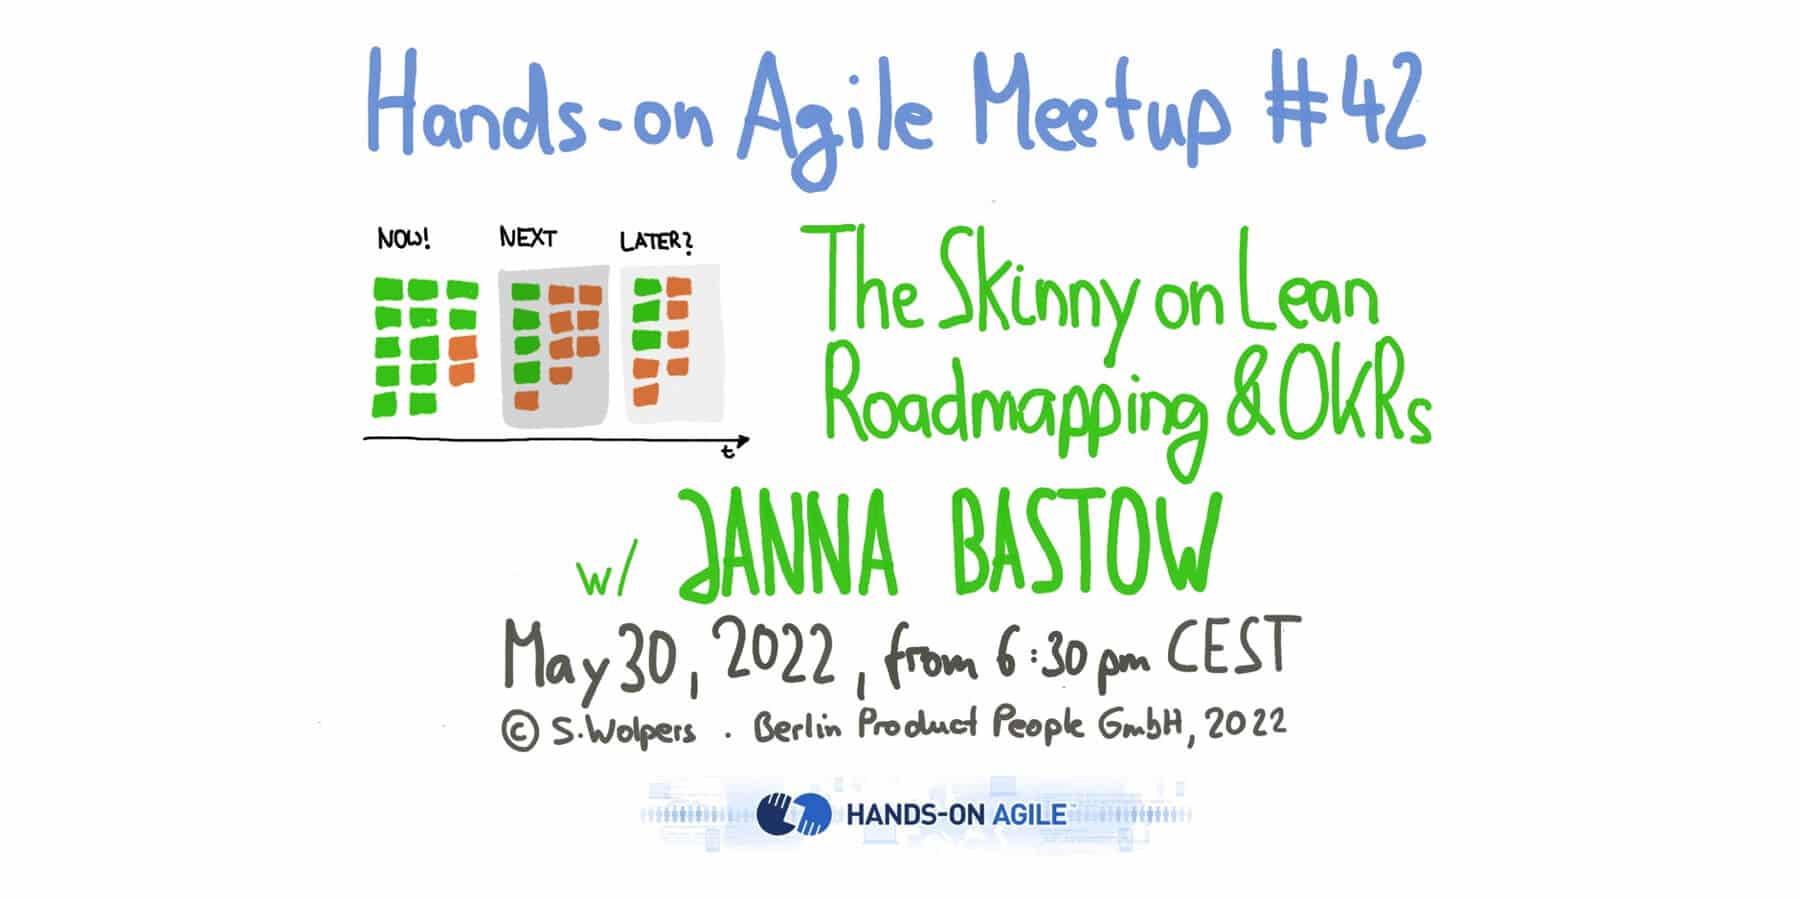 Hands-on Agile #42: The Skinny on Lean Roadmapping and OKRs w/ Janna Bastow on May 30, 2022 — Berlin Product People GmbH